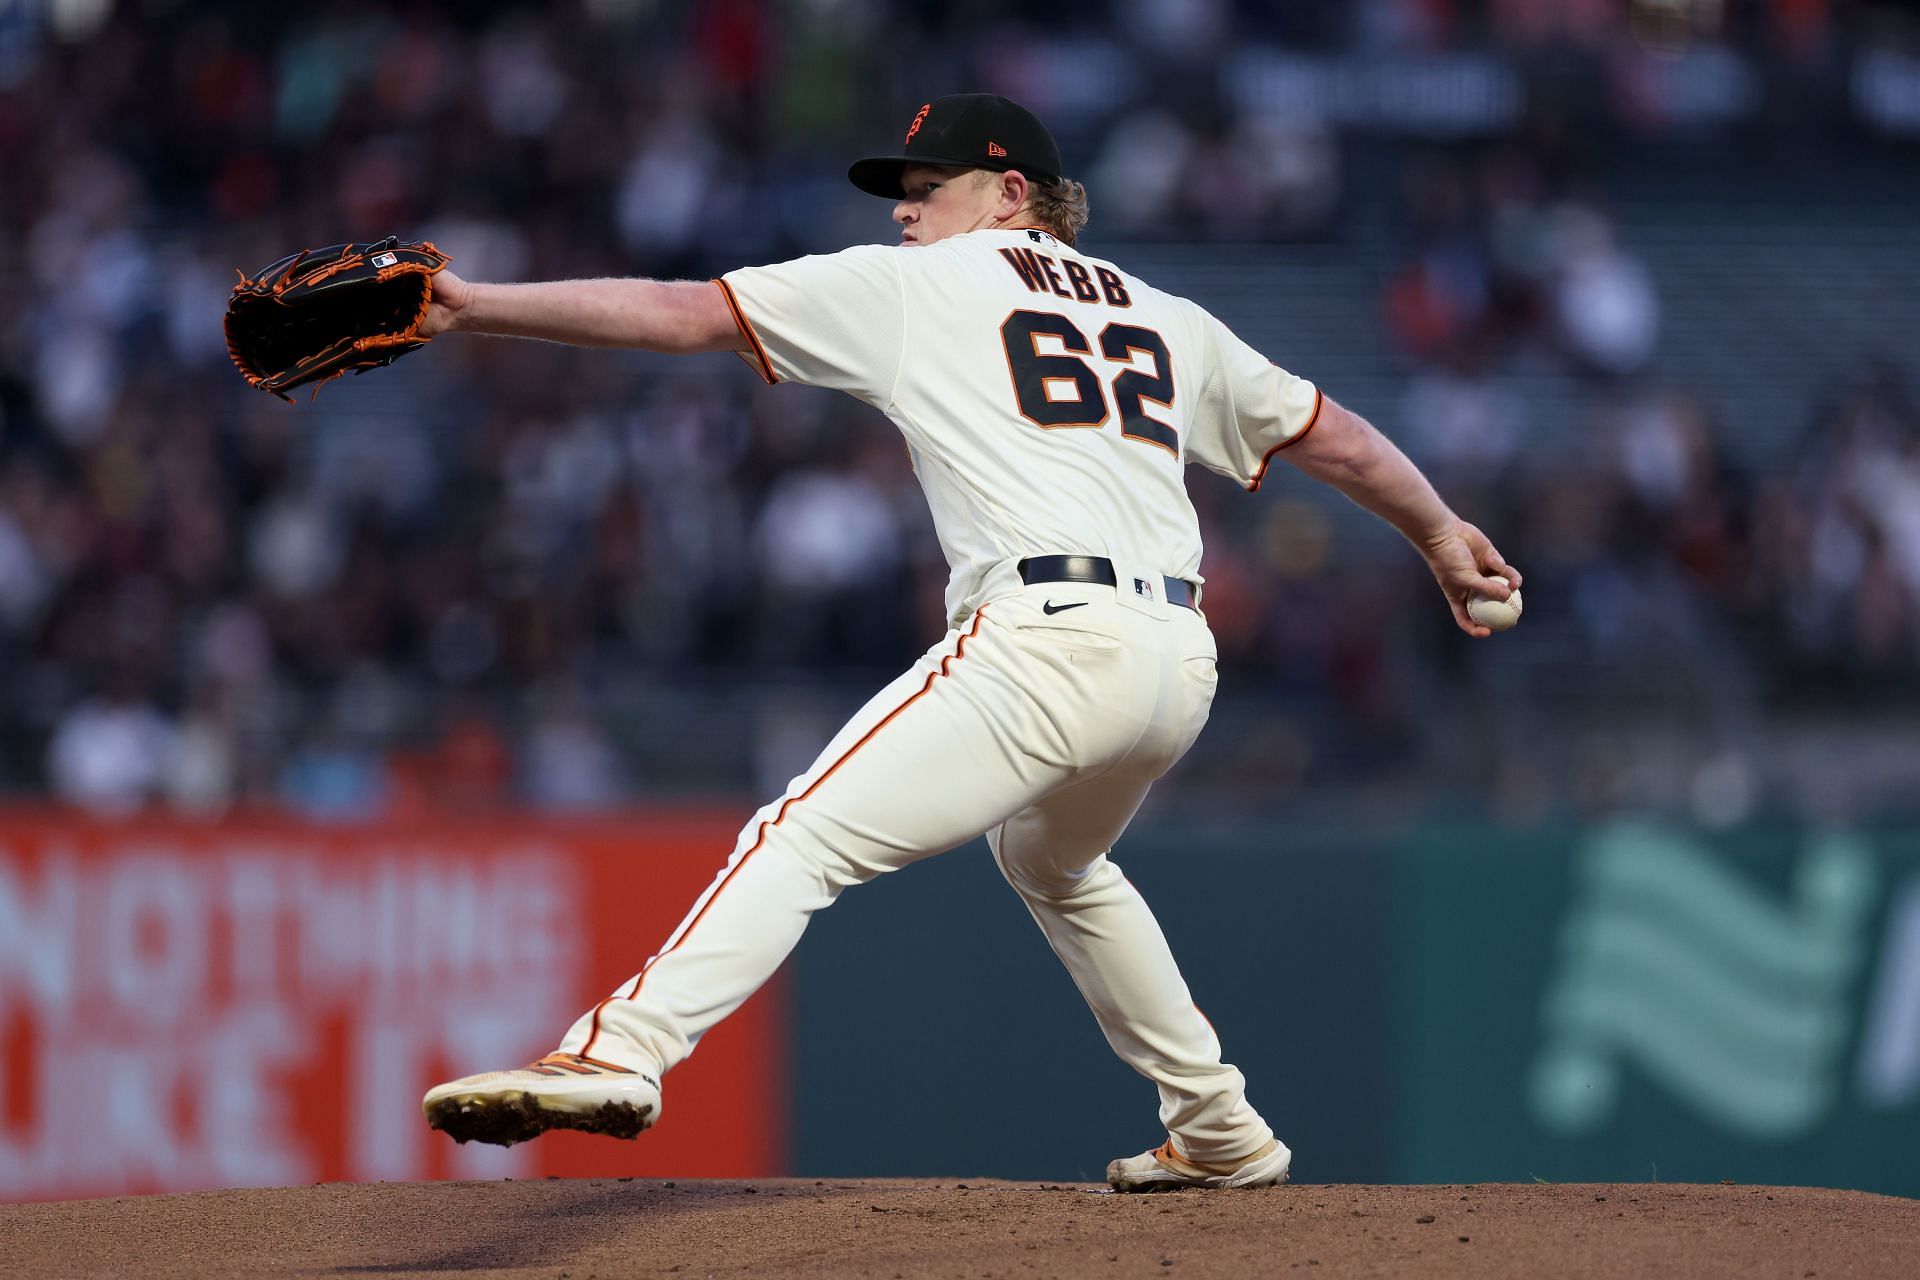 The Giants have two of the best pitchers in baseball